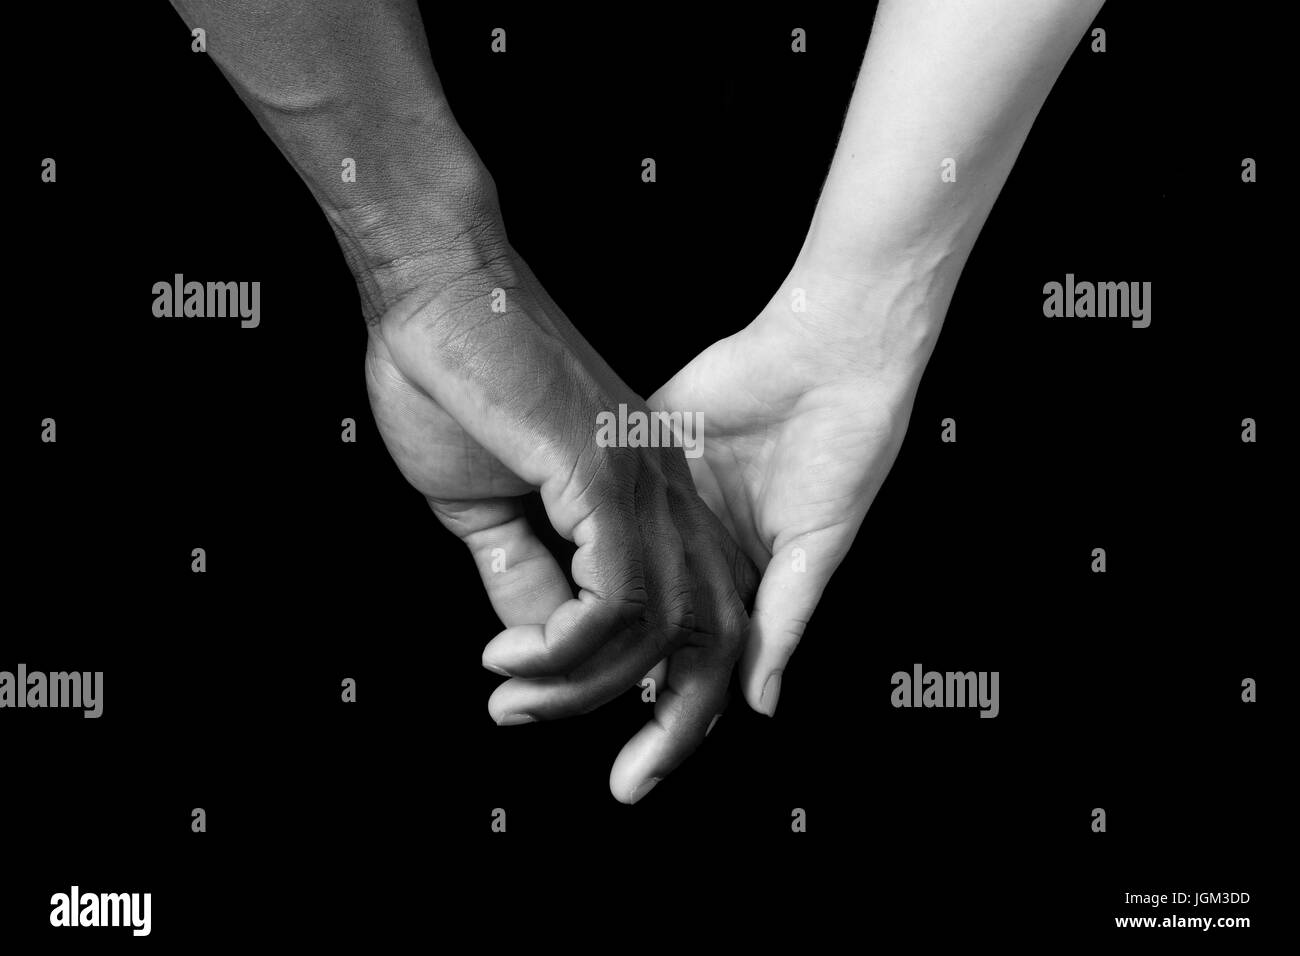 A hands of black man and white woman on black background Stock Photo